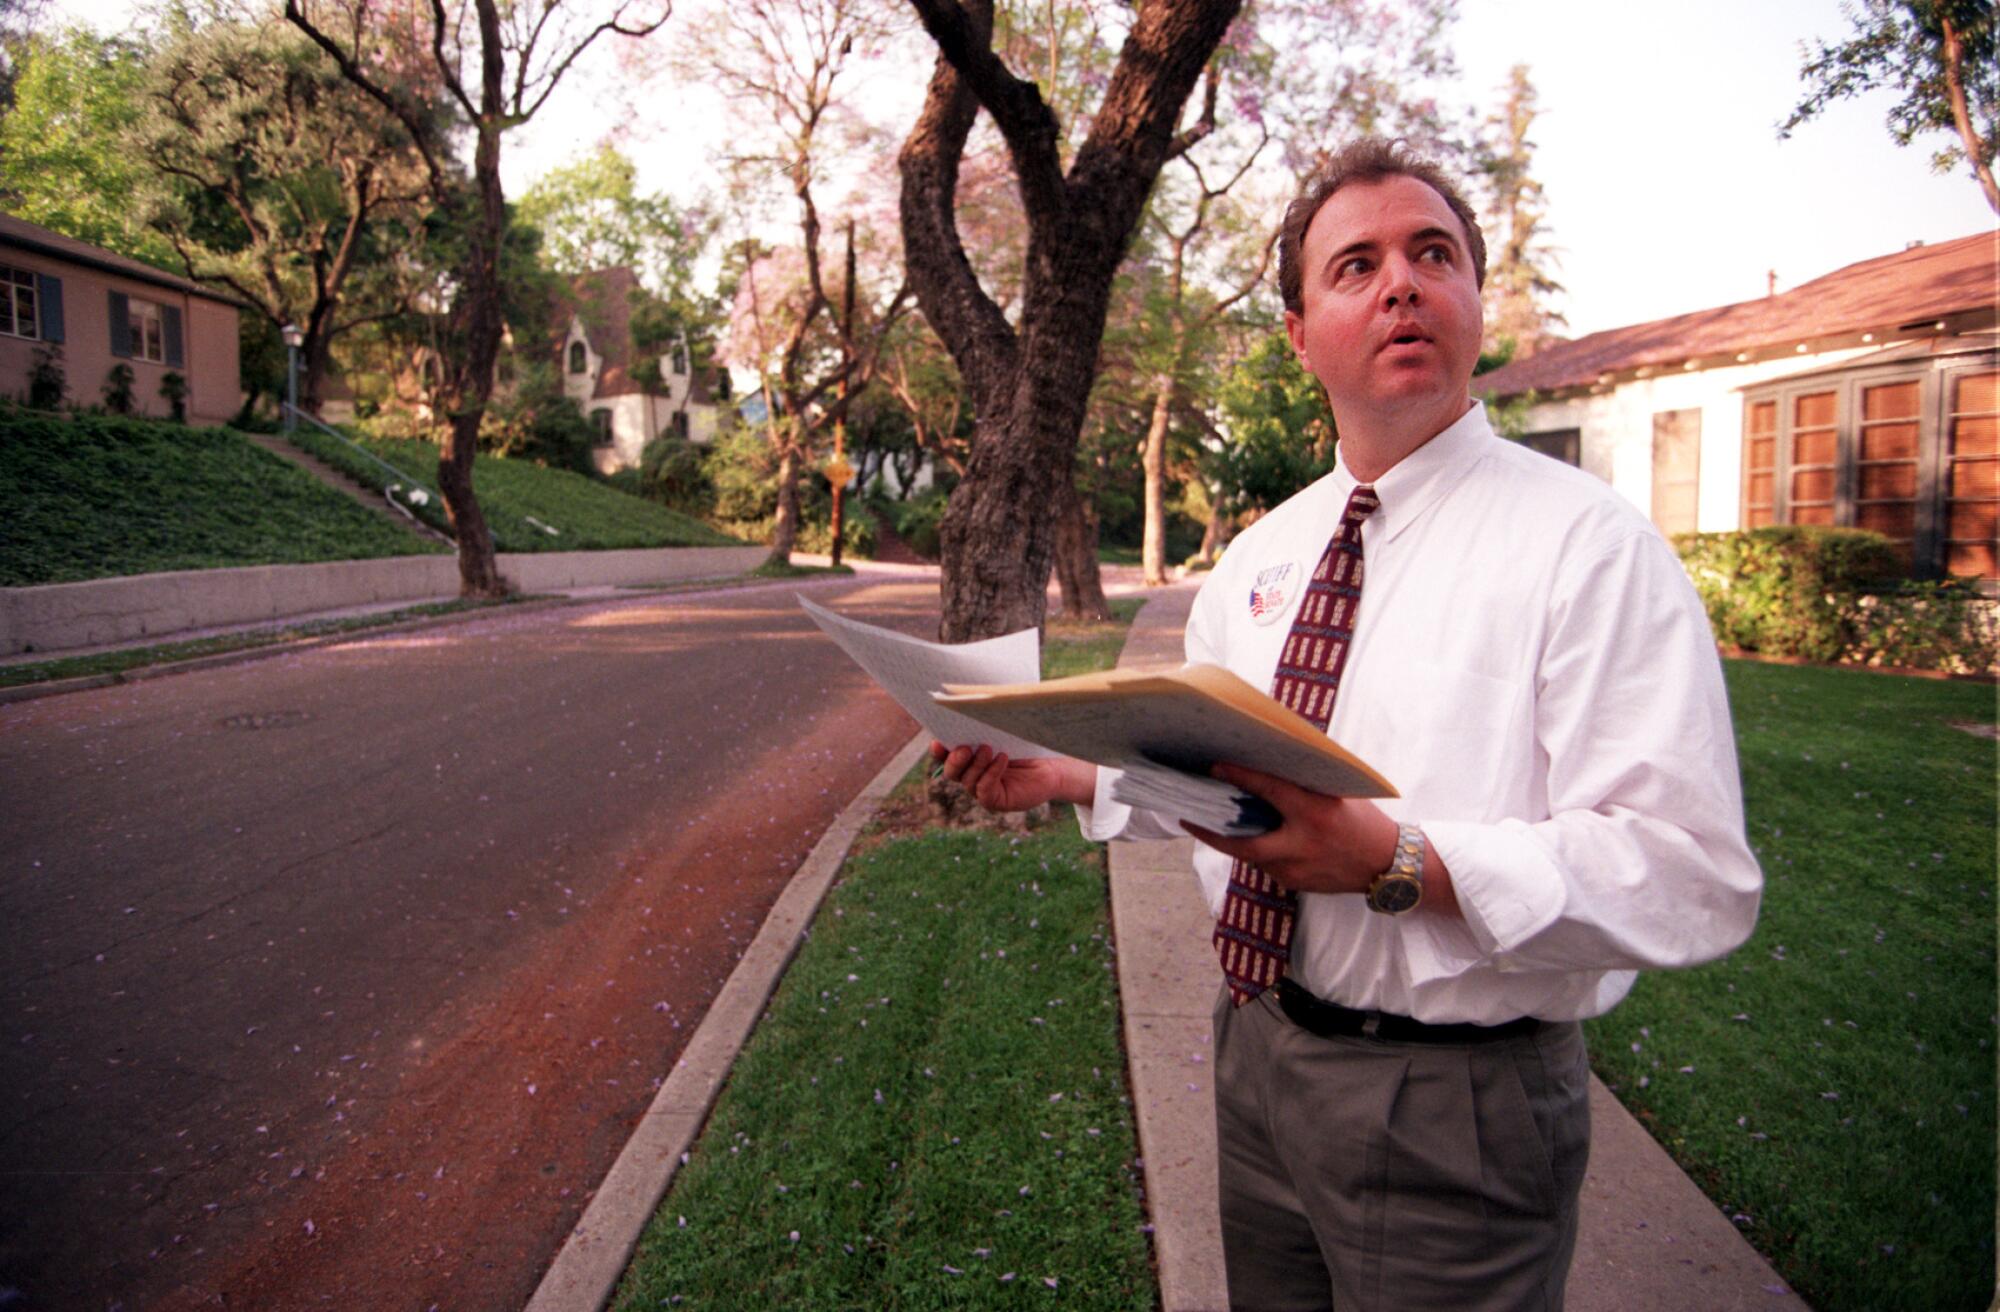 Adam Schiff holding a folder and papers and looking around as he stands on a sidewalk on a tree-lined residential street.